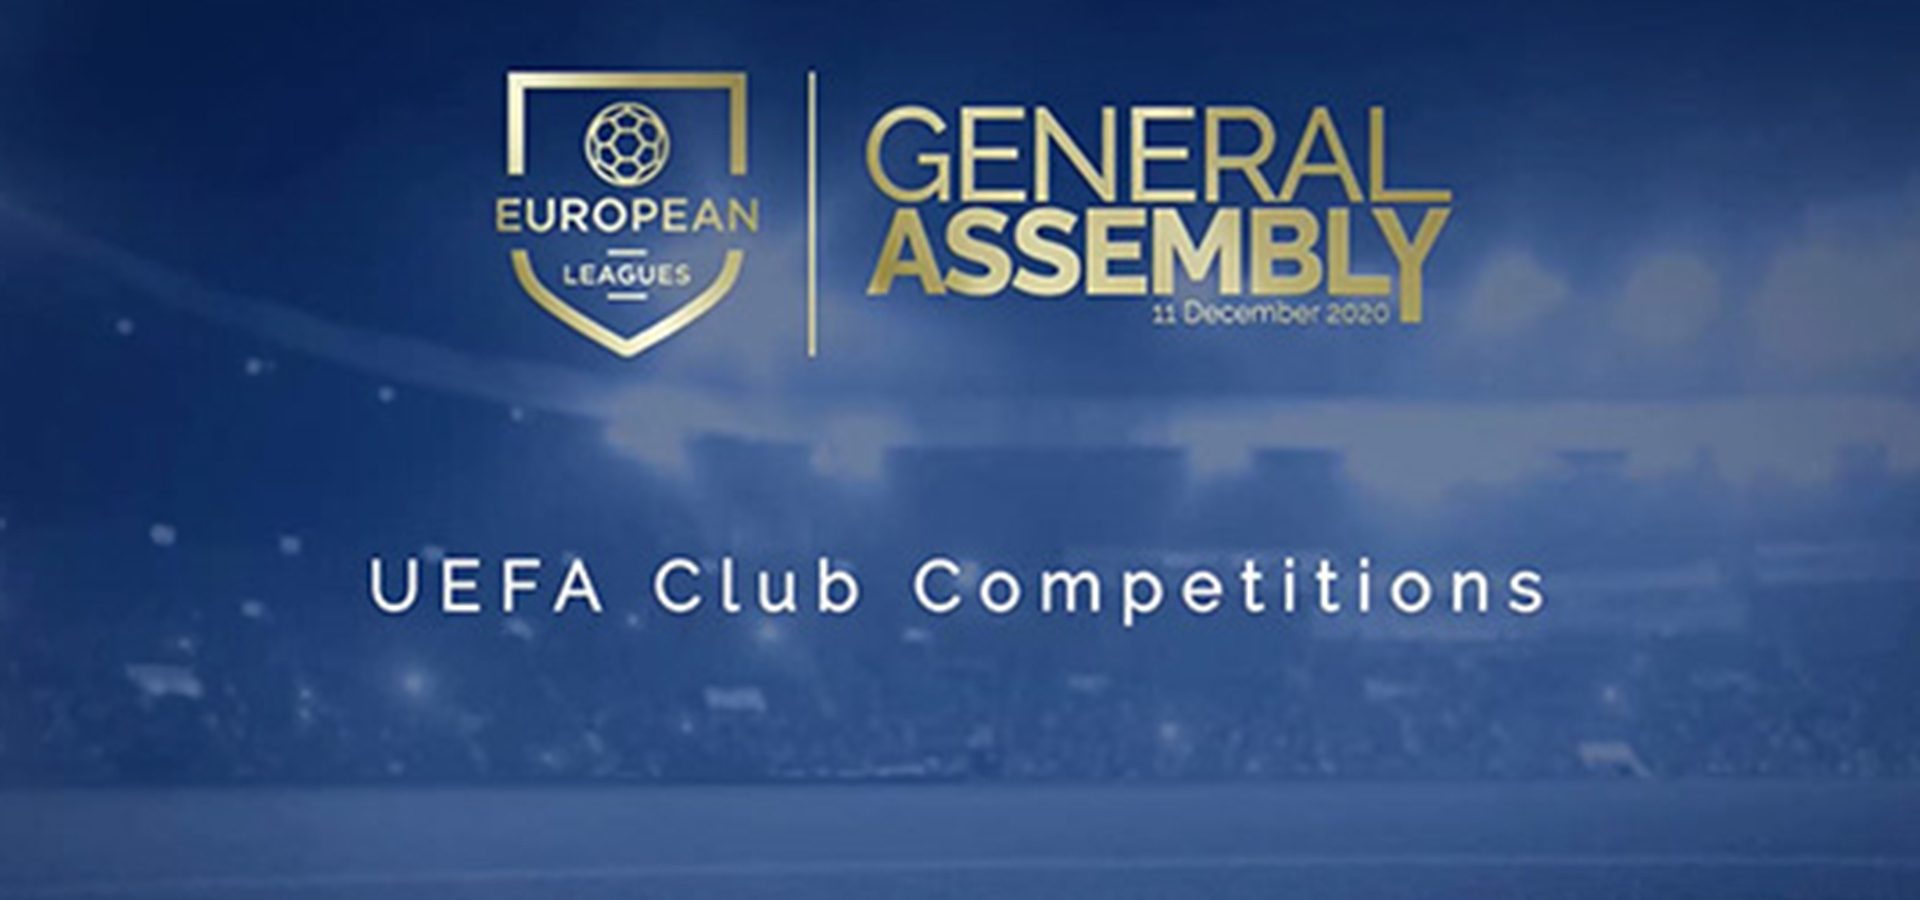 slider European Leagues General Assembly